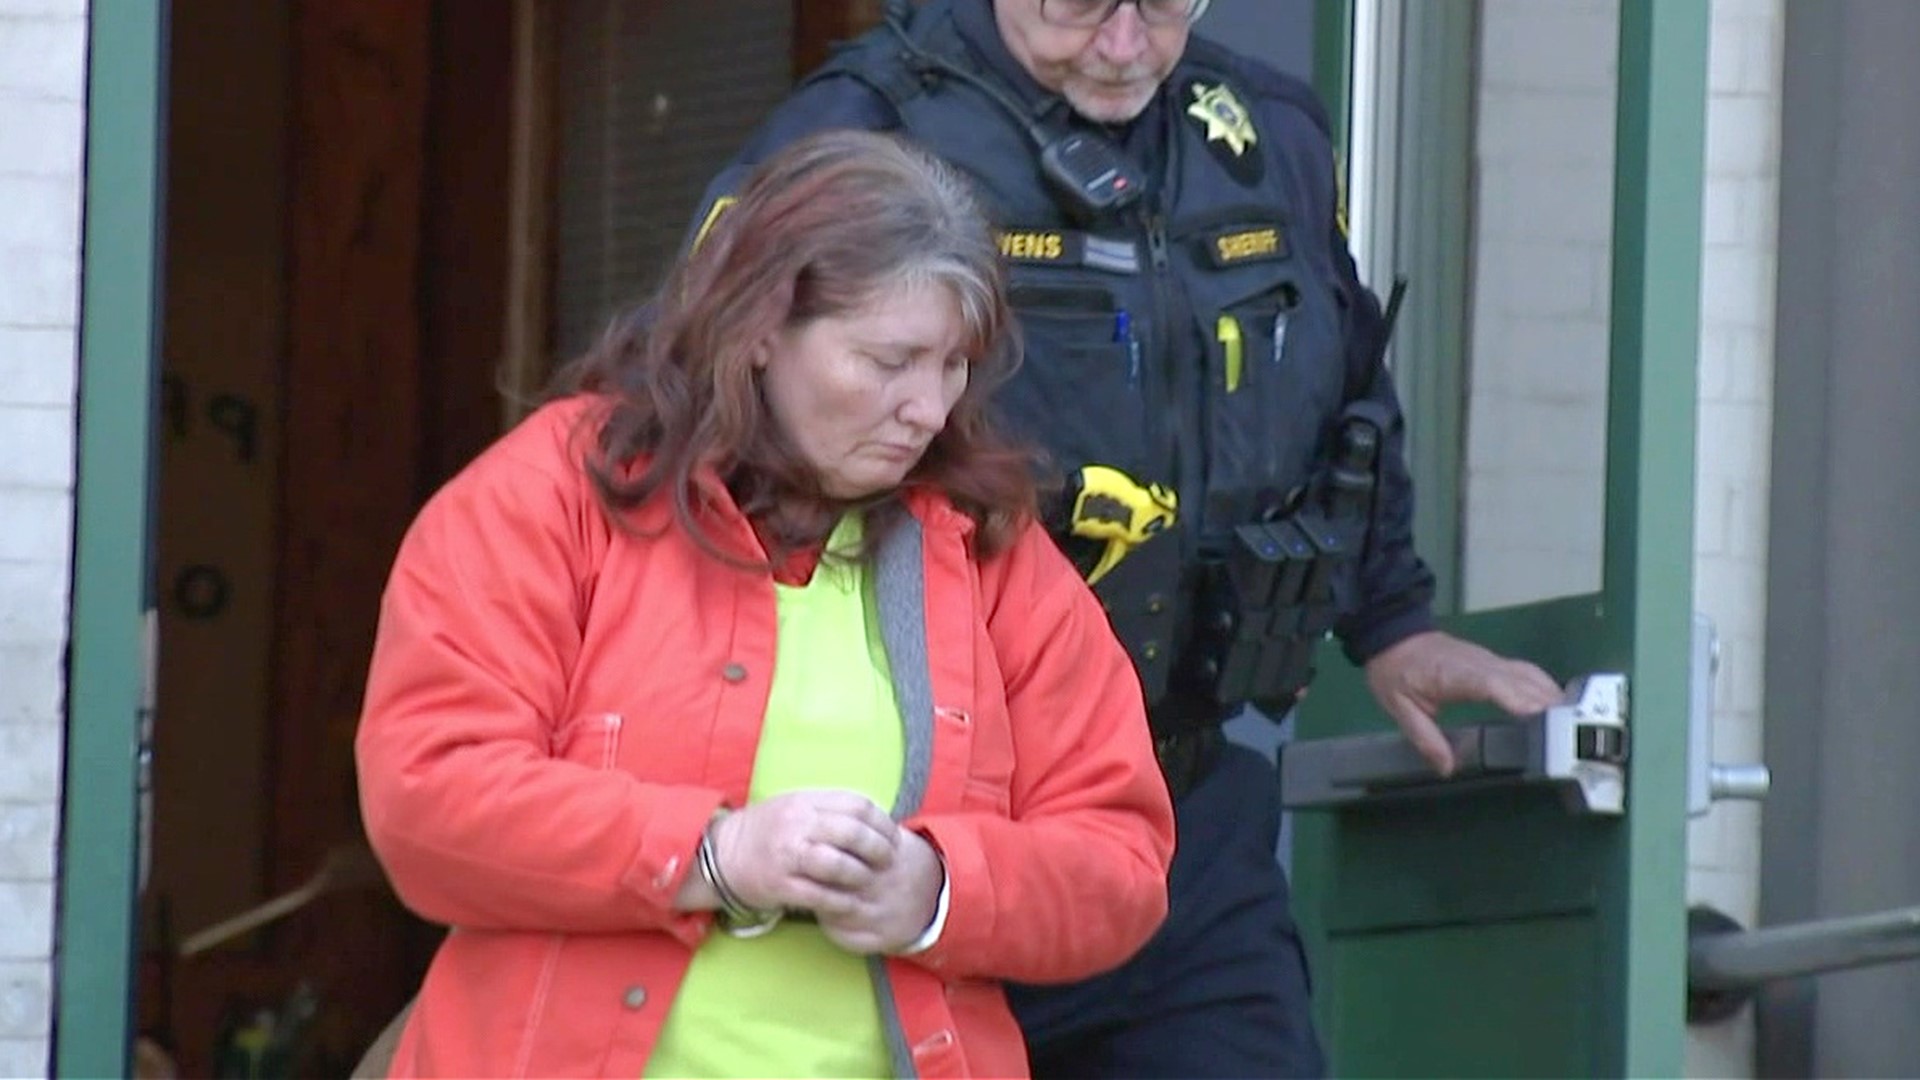 Christy Willis was found guilty on charges related to the severe beating of Arabella Parker, age 3, that led to her death in 2019.